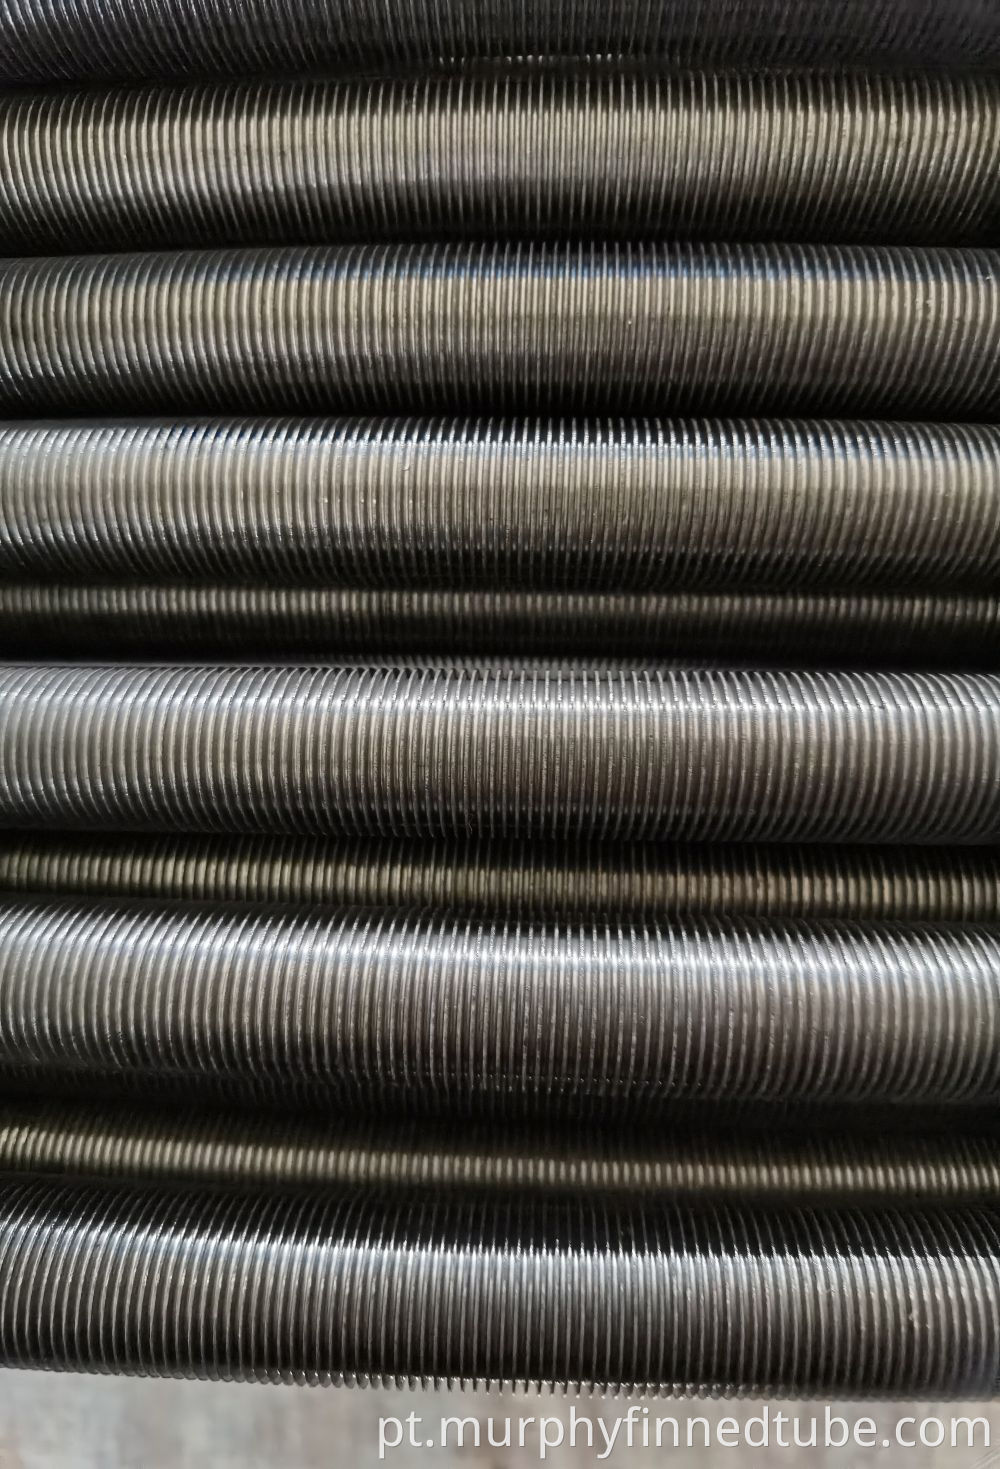 Extruded Fin Tubes